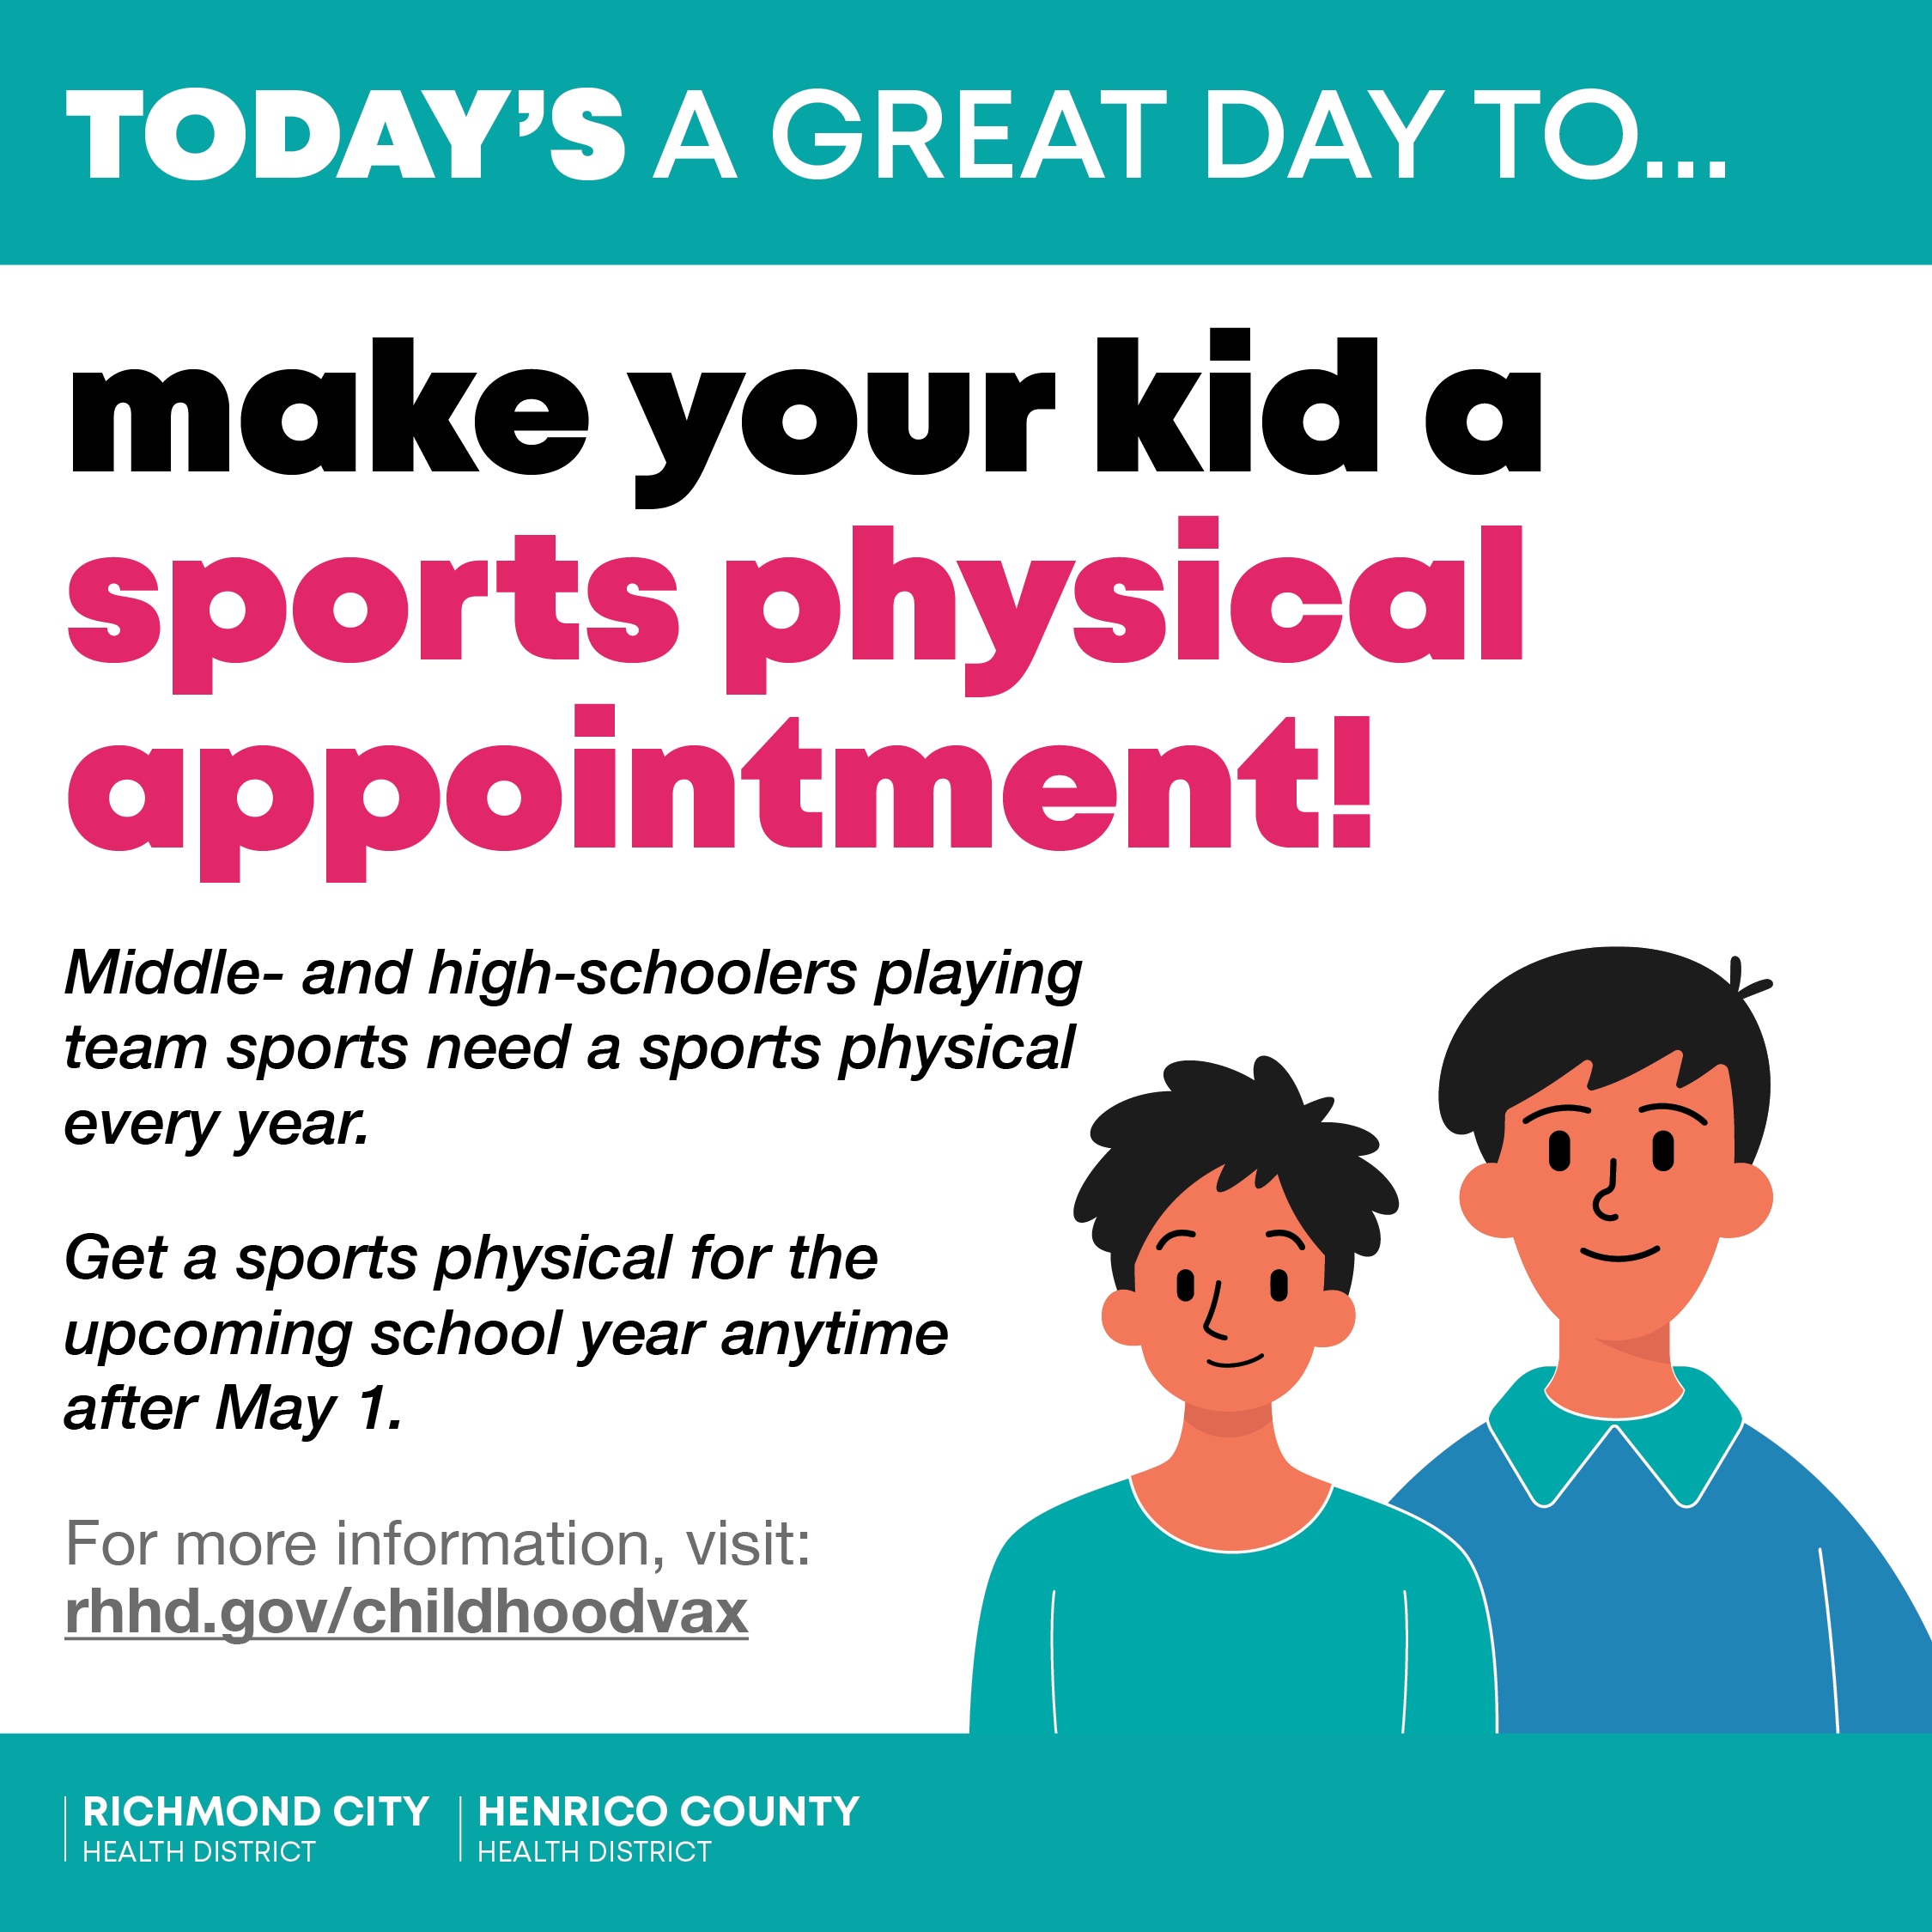 An image describing how to up an appointment for a child's sports physicals.